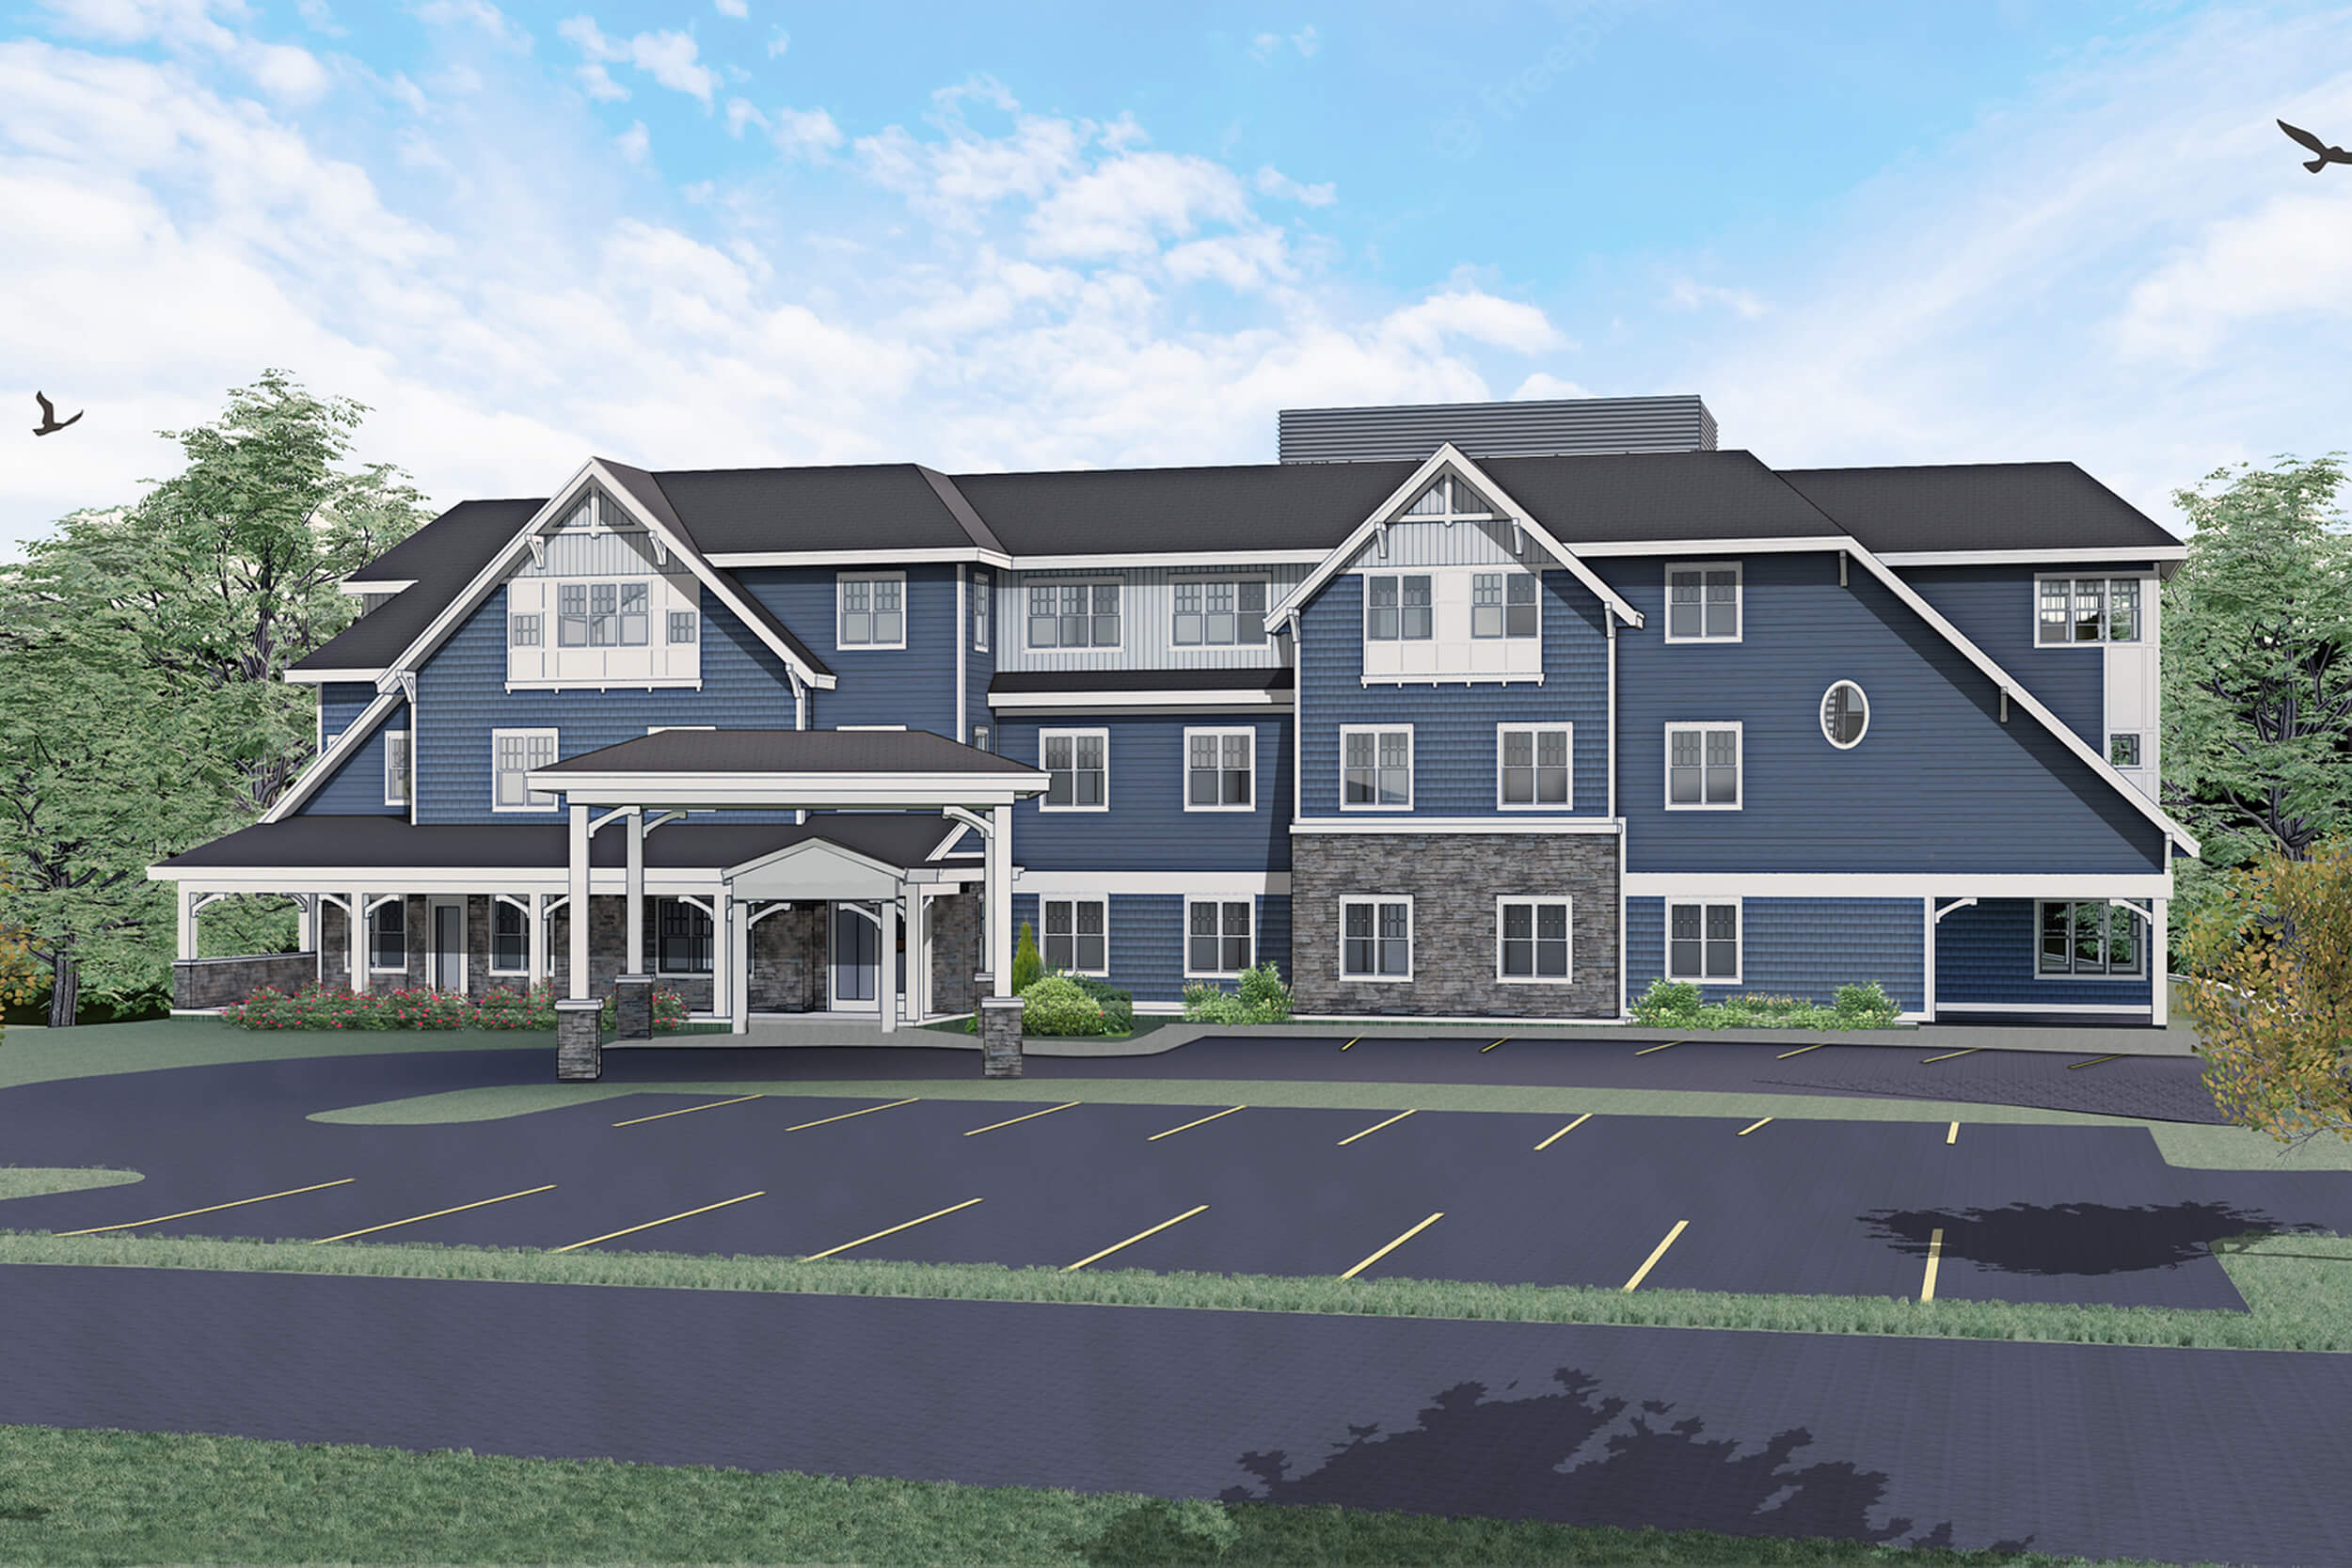 Artist's rendering sketch of a senior living facility building. The multi-level building features blue siding with white trim, and a parking lot area is seen in front.